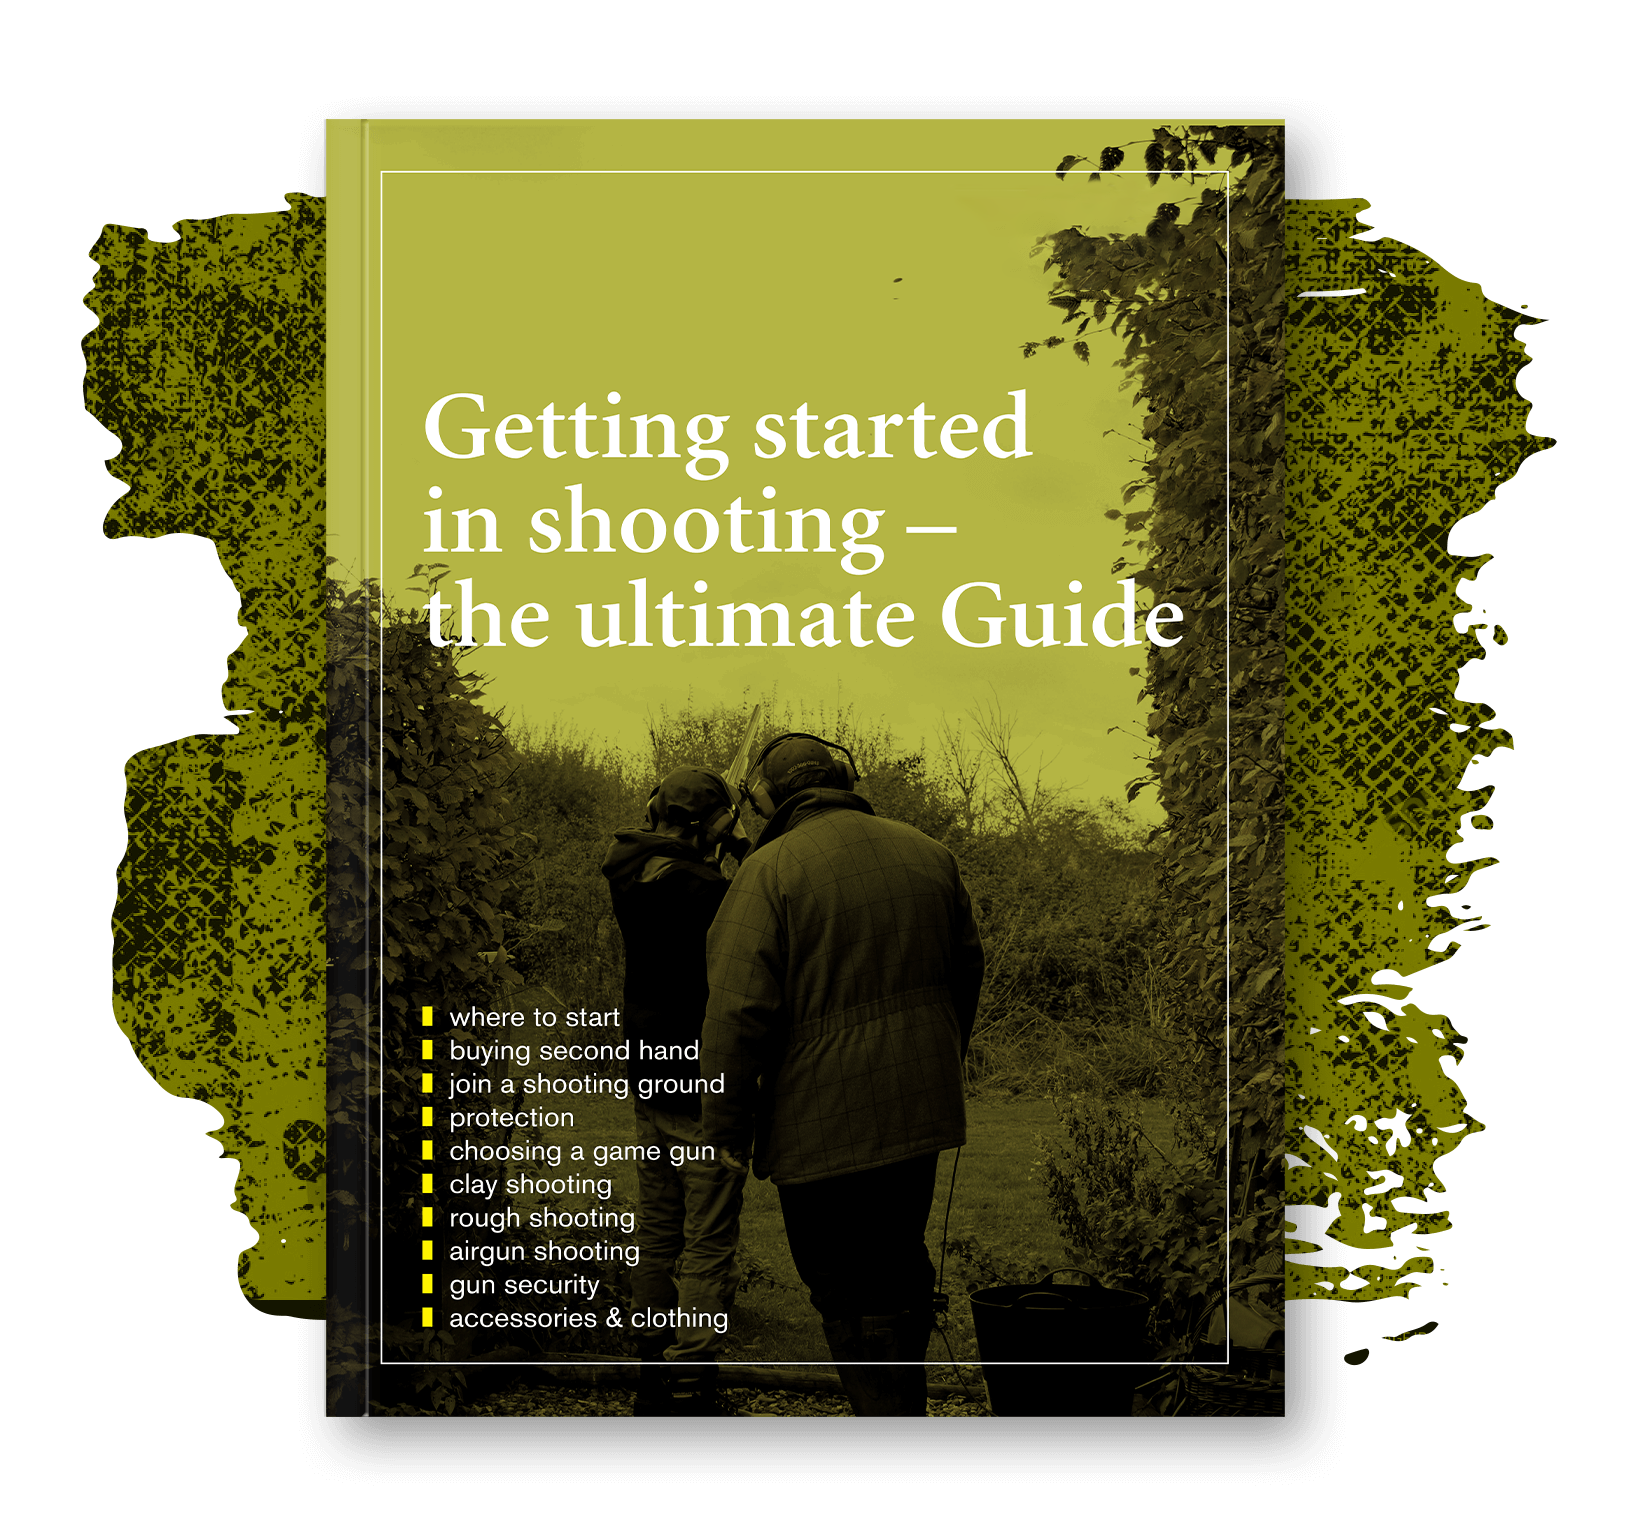 Getting started in shooting – the ultimate guide